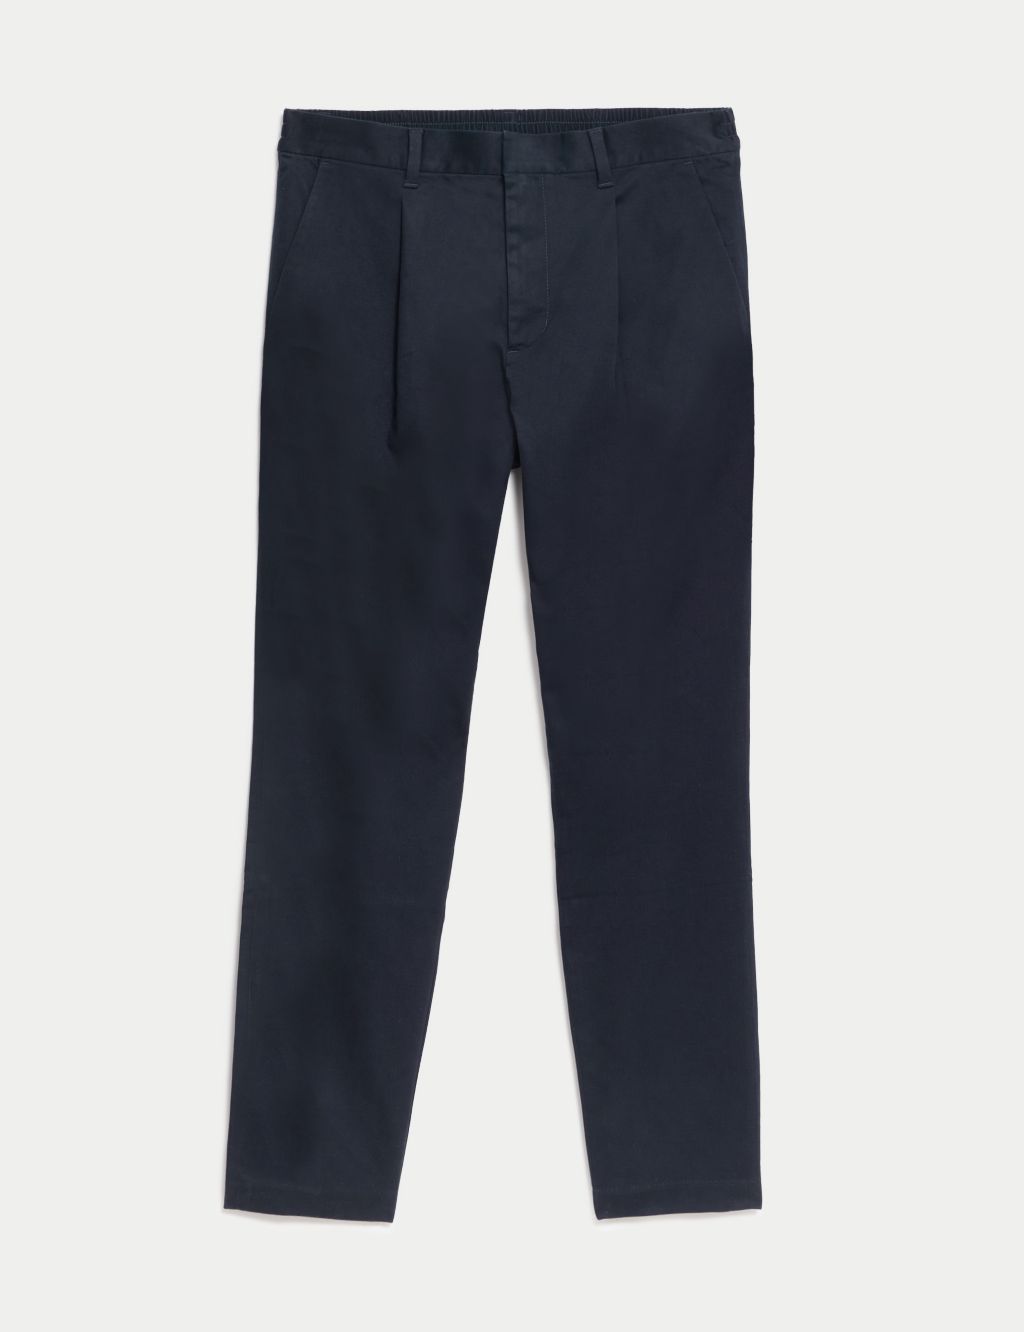 Tapered Fit Half-Elasticated Waist Chinos image 2